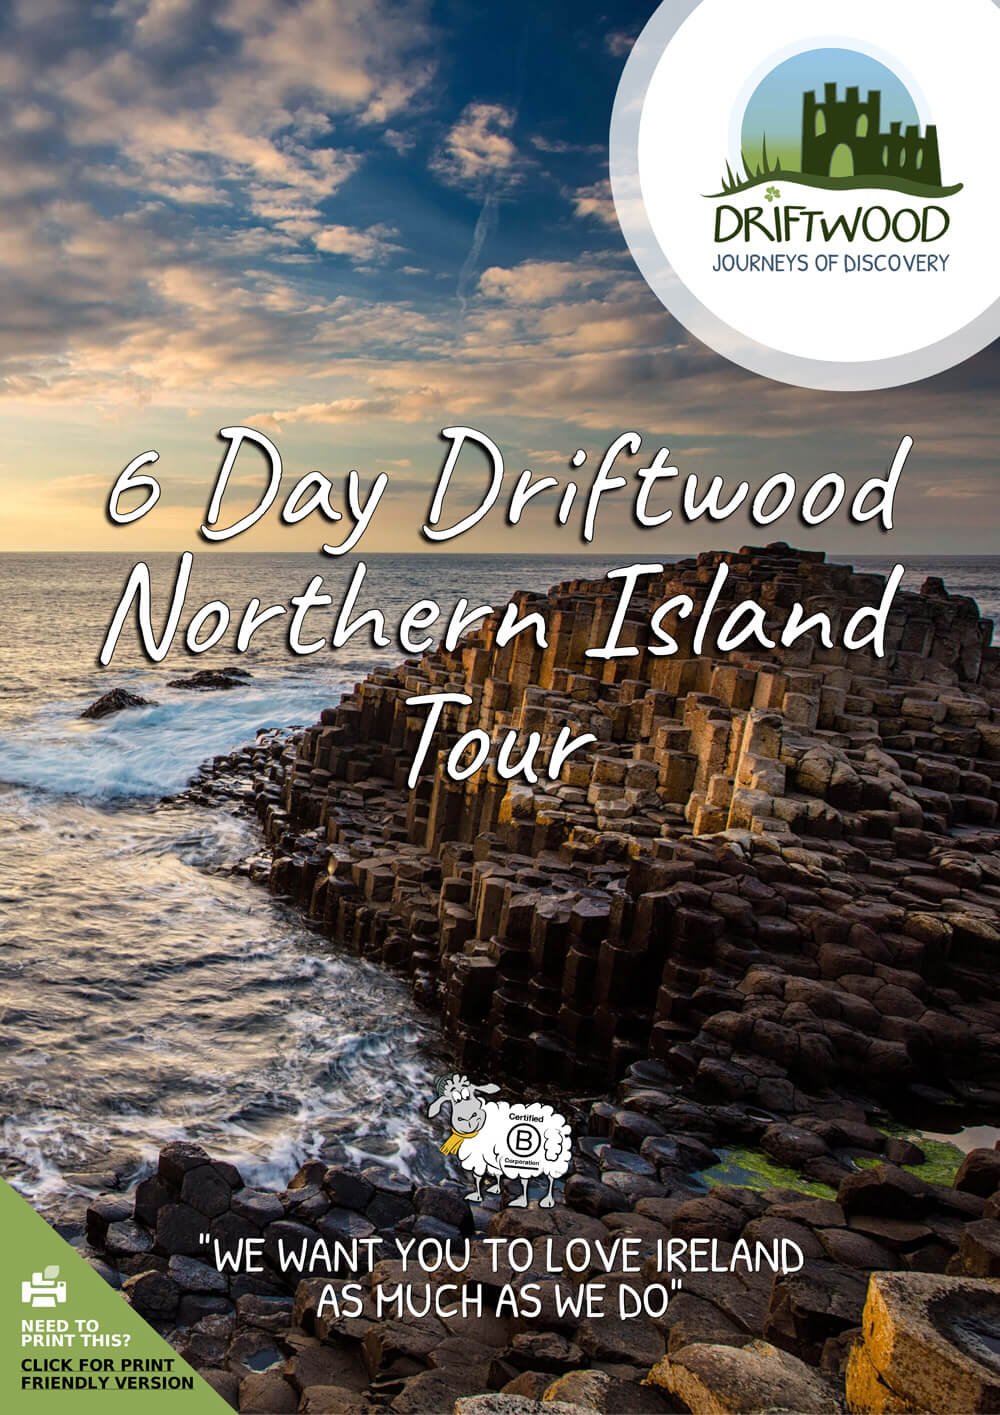 6 Day Driftwood Northern Island Tour itinerary cover with Giant's Causeway